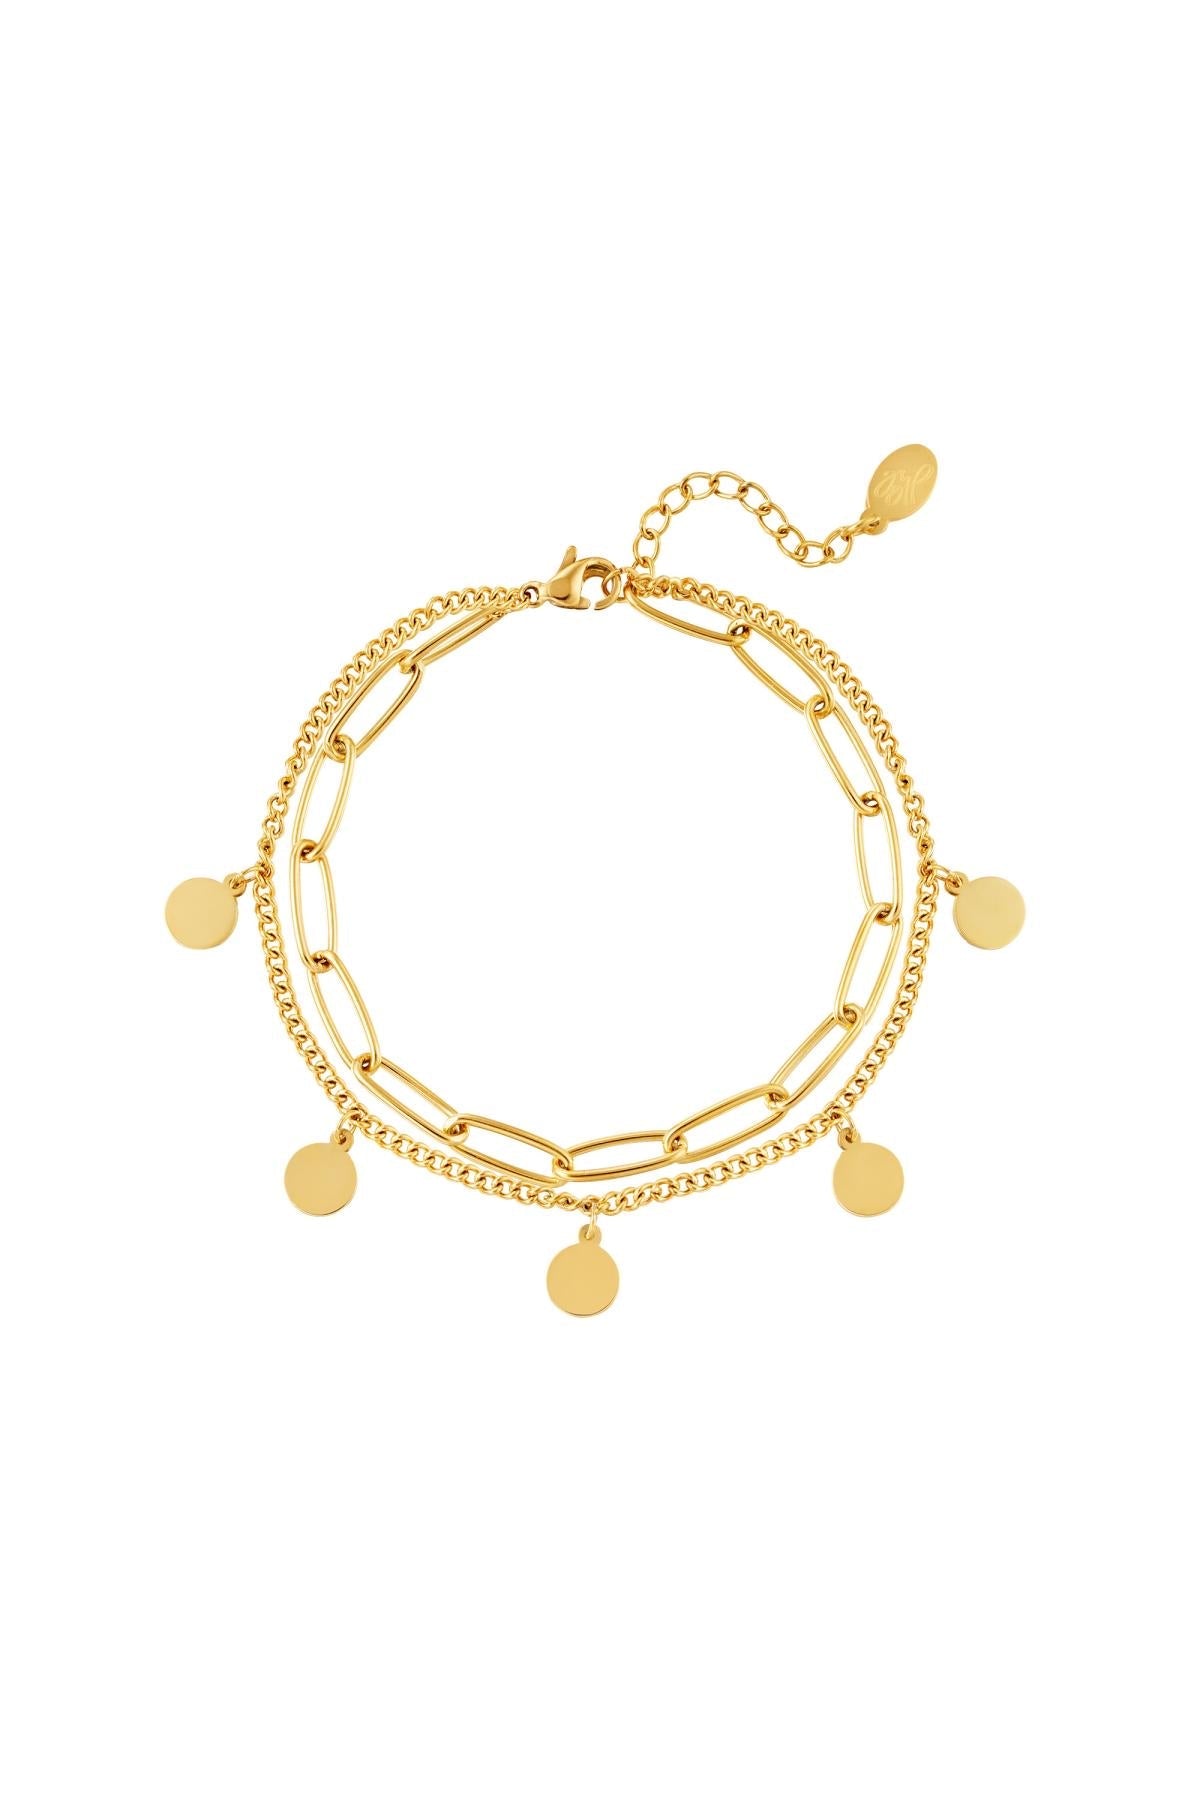 ♥︎CHAIN COIN ARMBAND - My Favourites